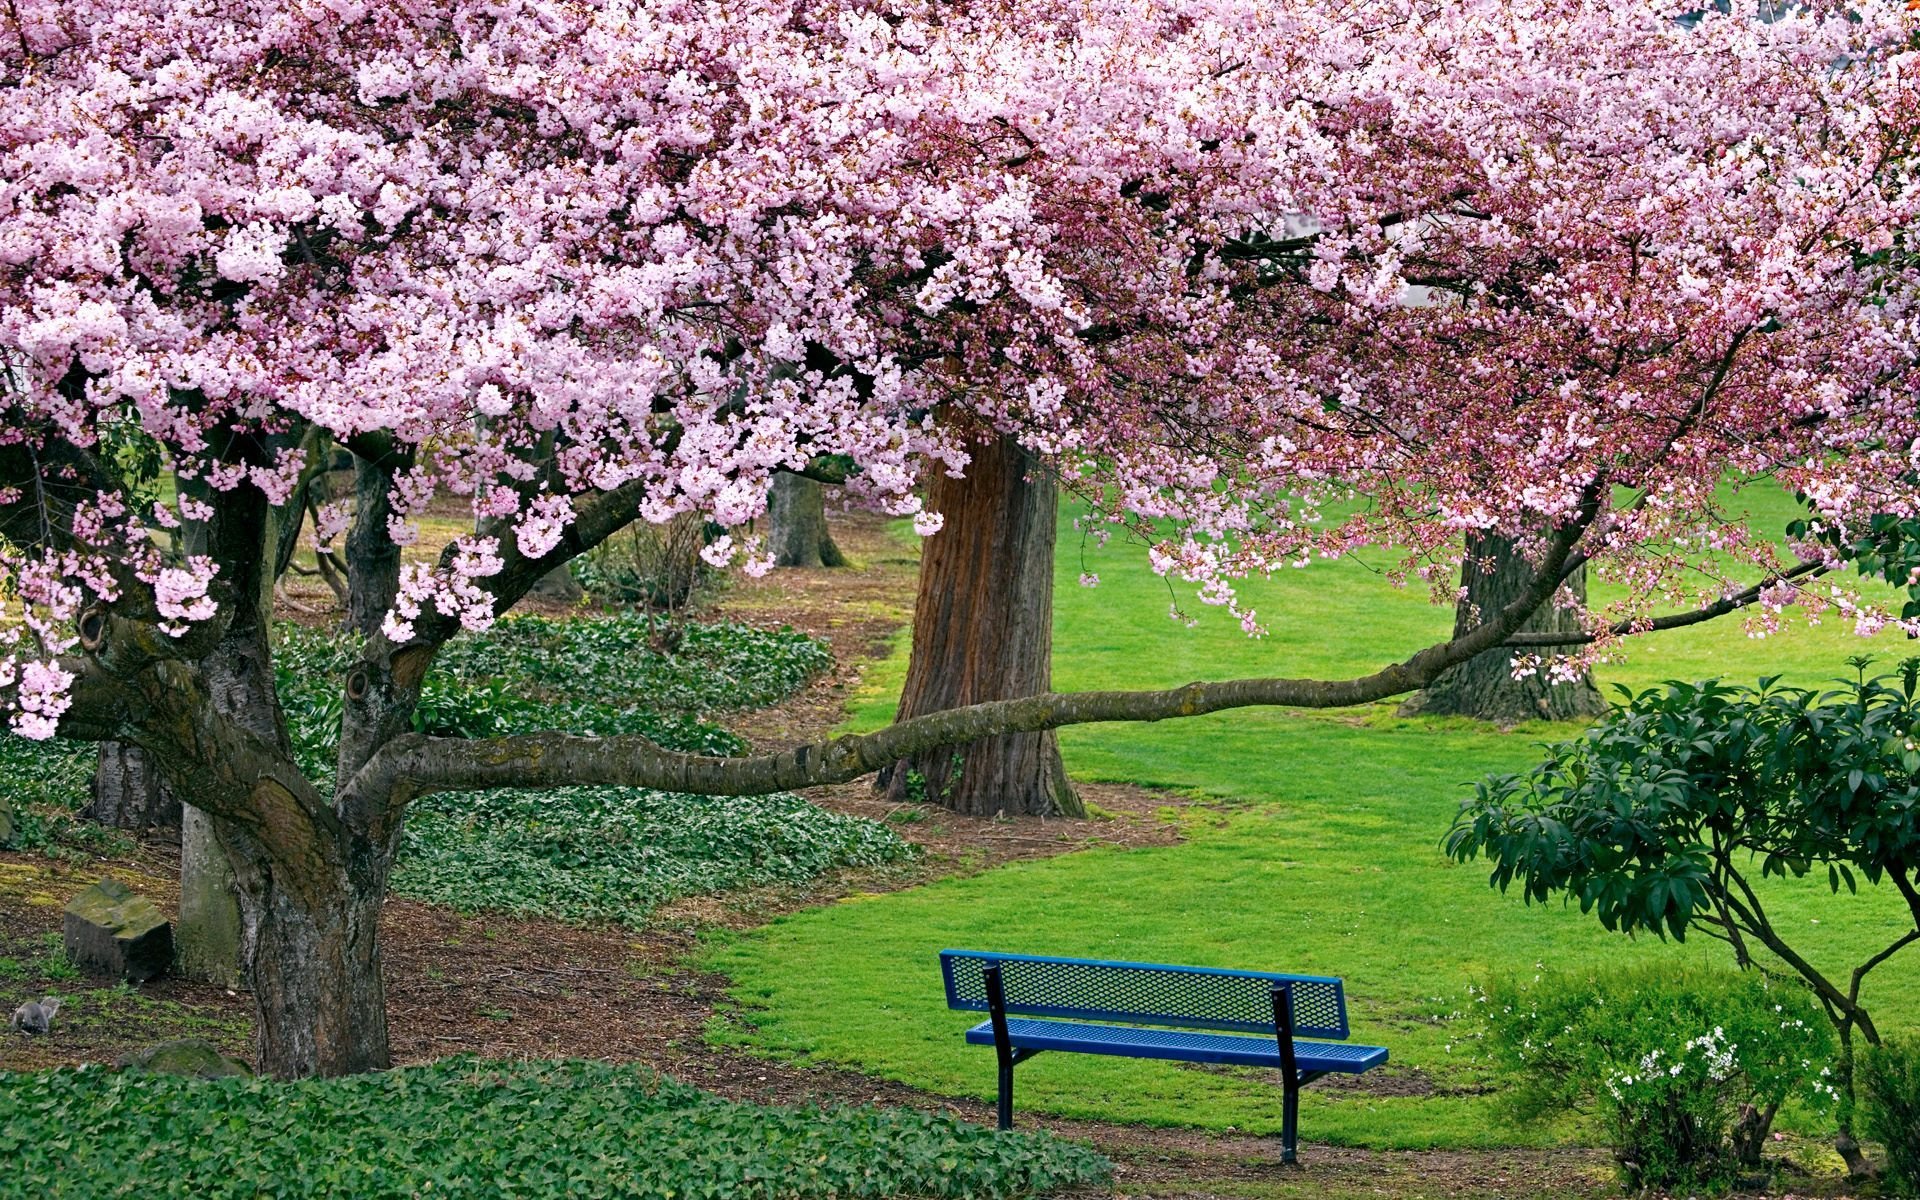 blue bench under blooming cherry tree 17043 Wallpaper